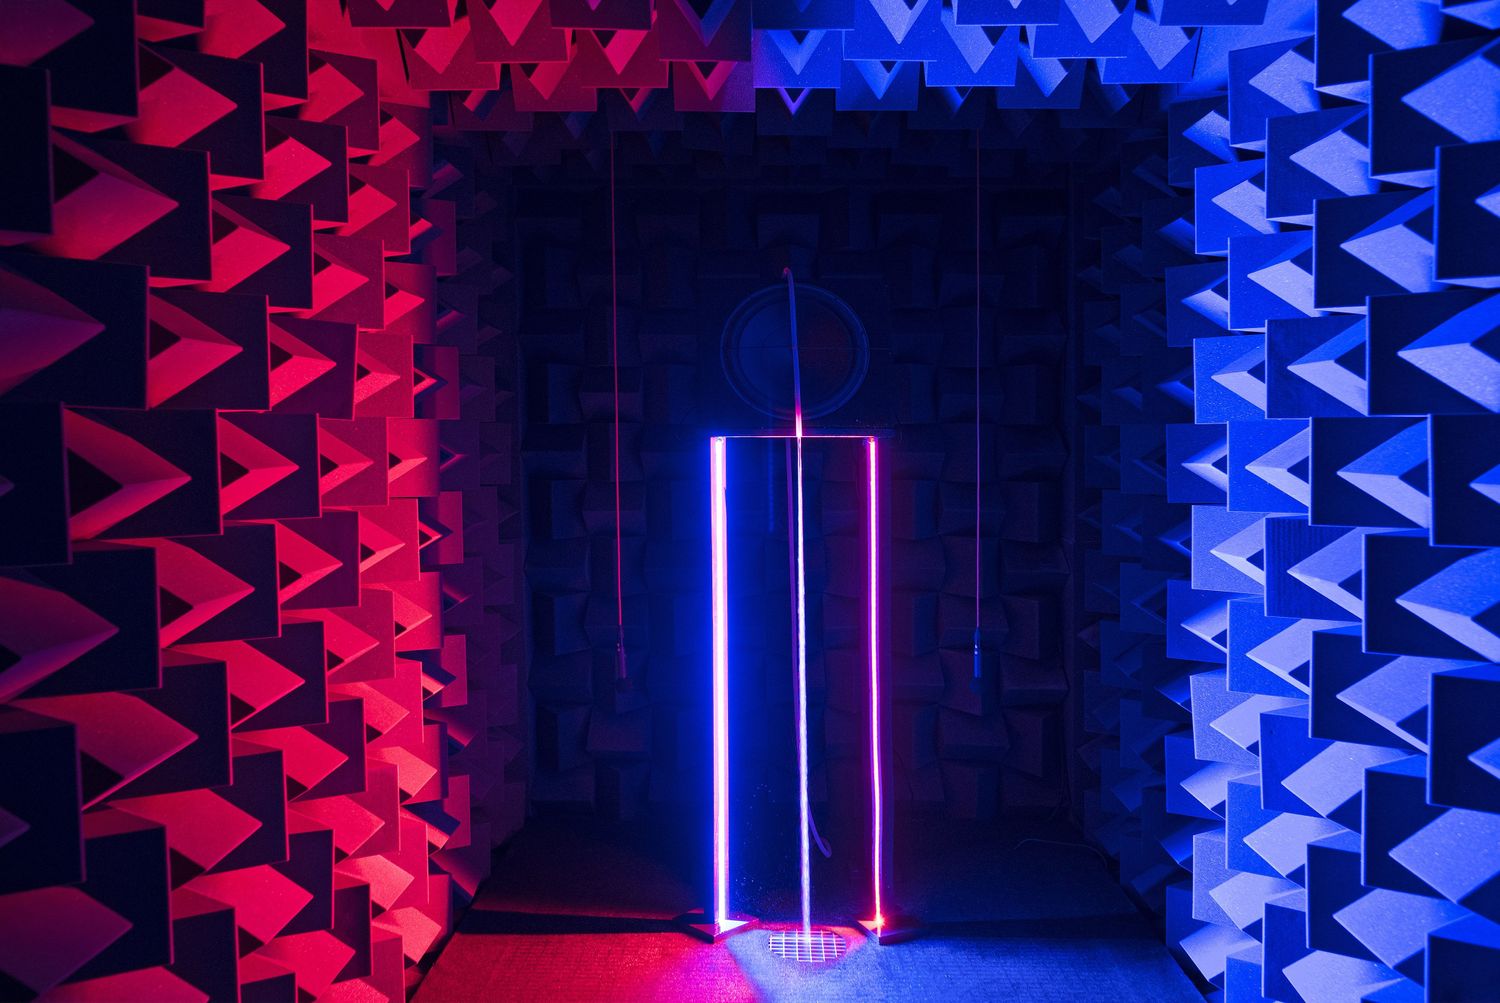 Haroon Mirza, /// ///, 2017. Installation view, Dancing with the Unknown, Nikolaj Kunsthal, Copenhagen, 2018 Courtesy: hrm199 and Nikolaj Kunsthal. Photographer: Per Wessel